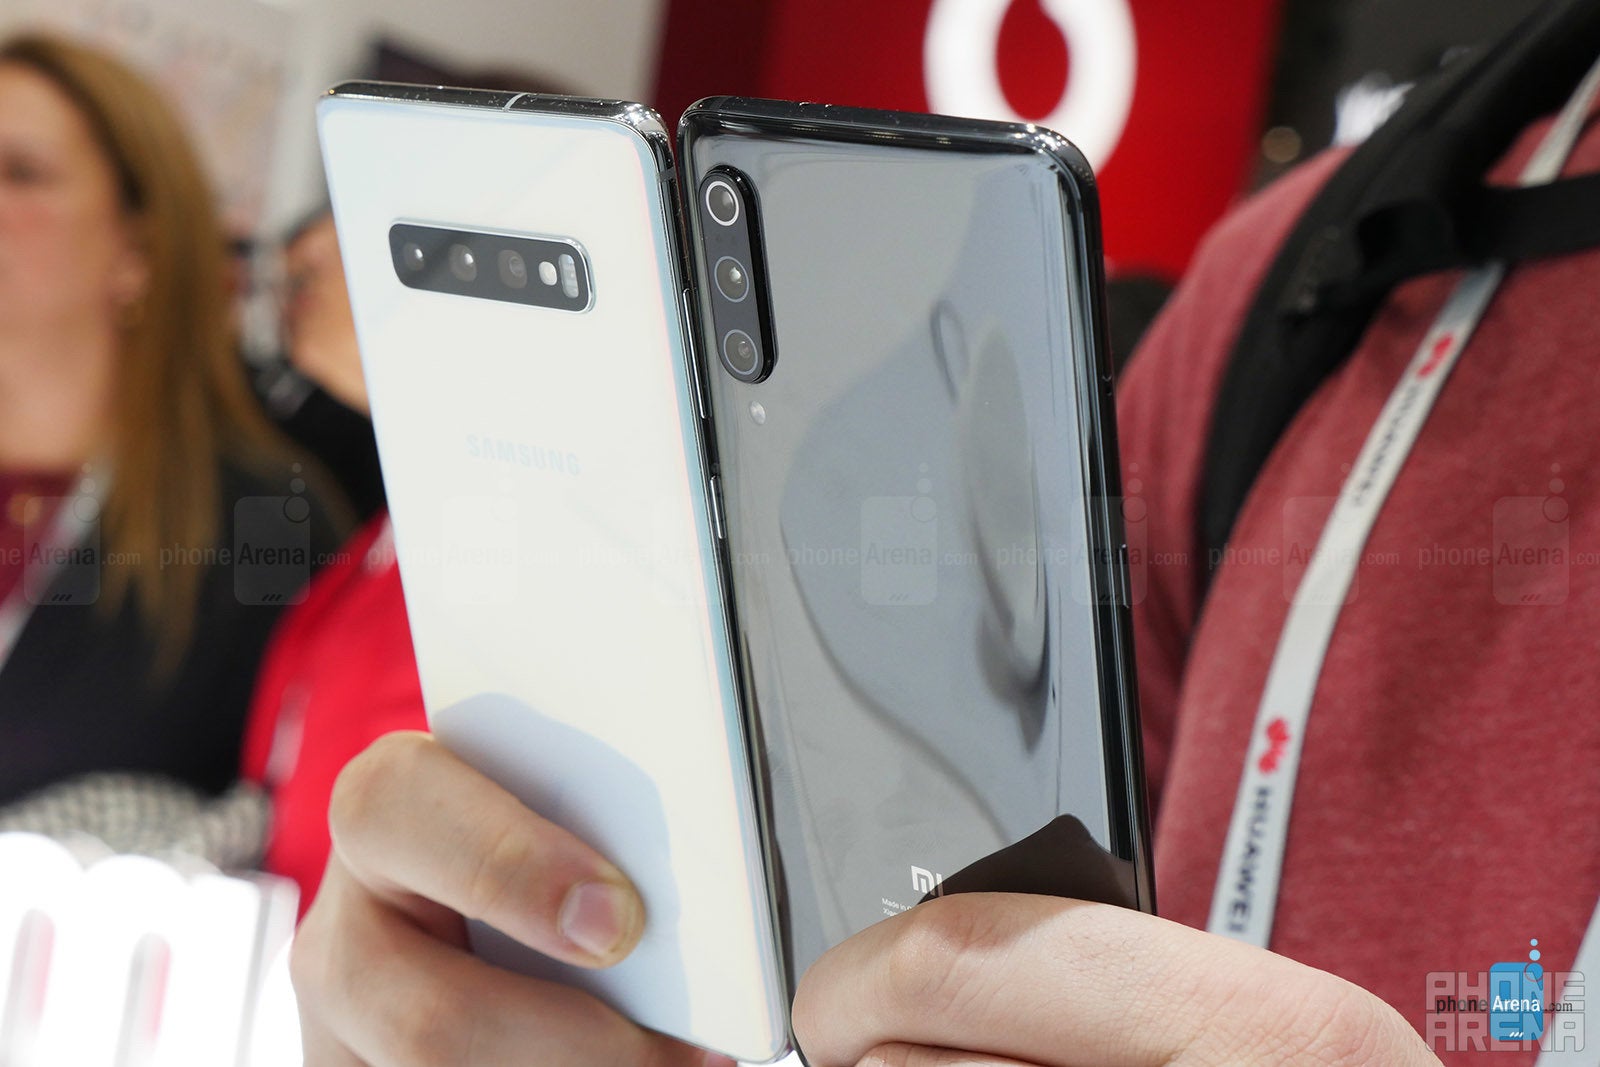 Samsung Galaxy S10+ vs Xiaomi Mi 9: A first look at the two flagships